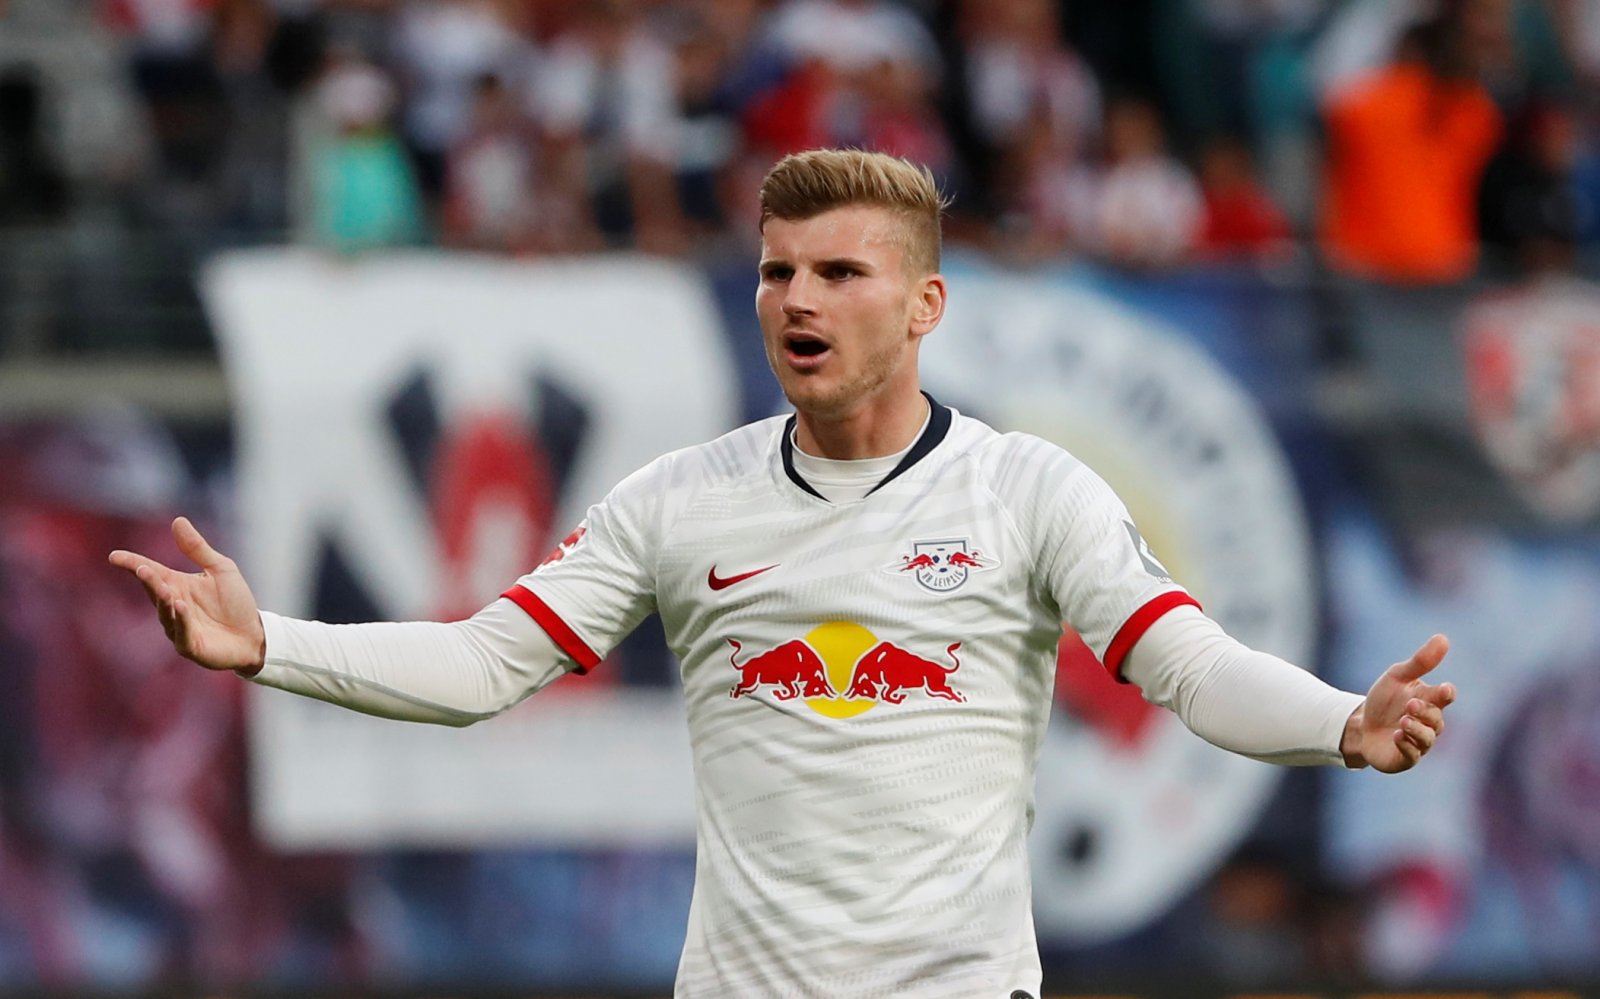 Timo Werner placed on hold by Liverpool until next transfer window